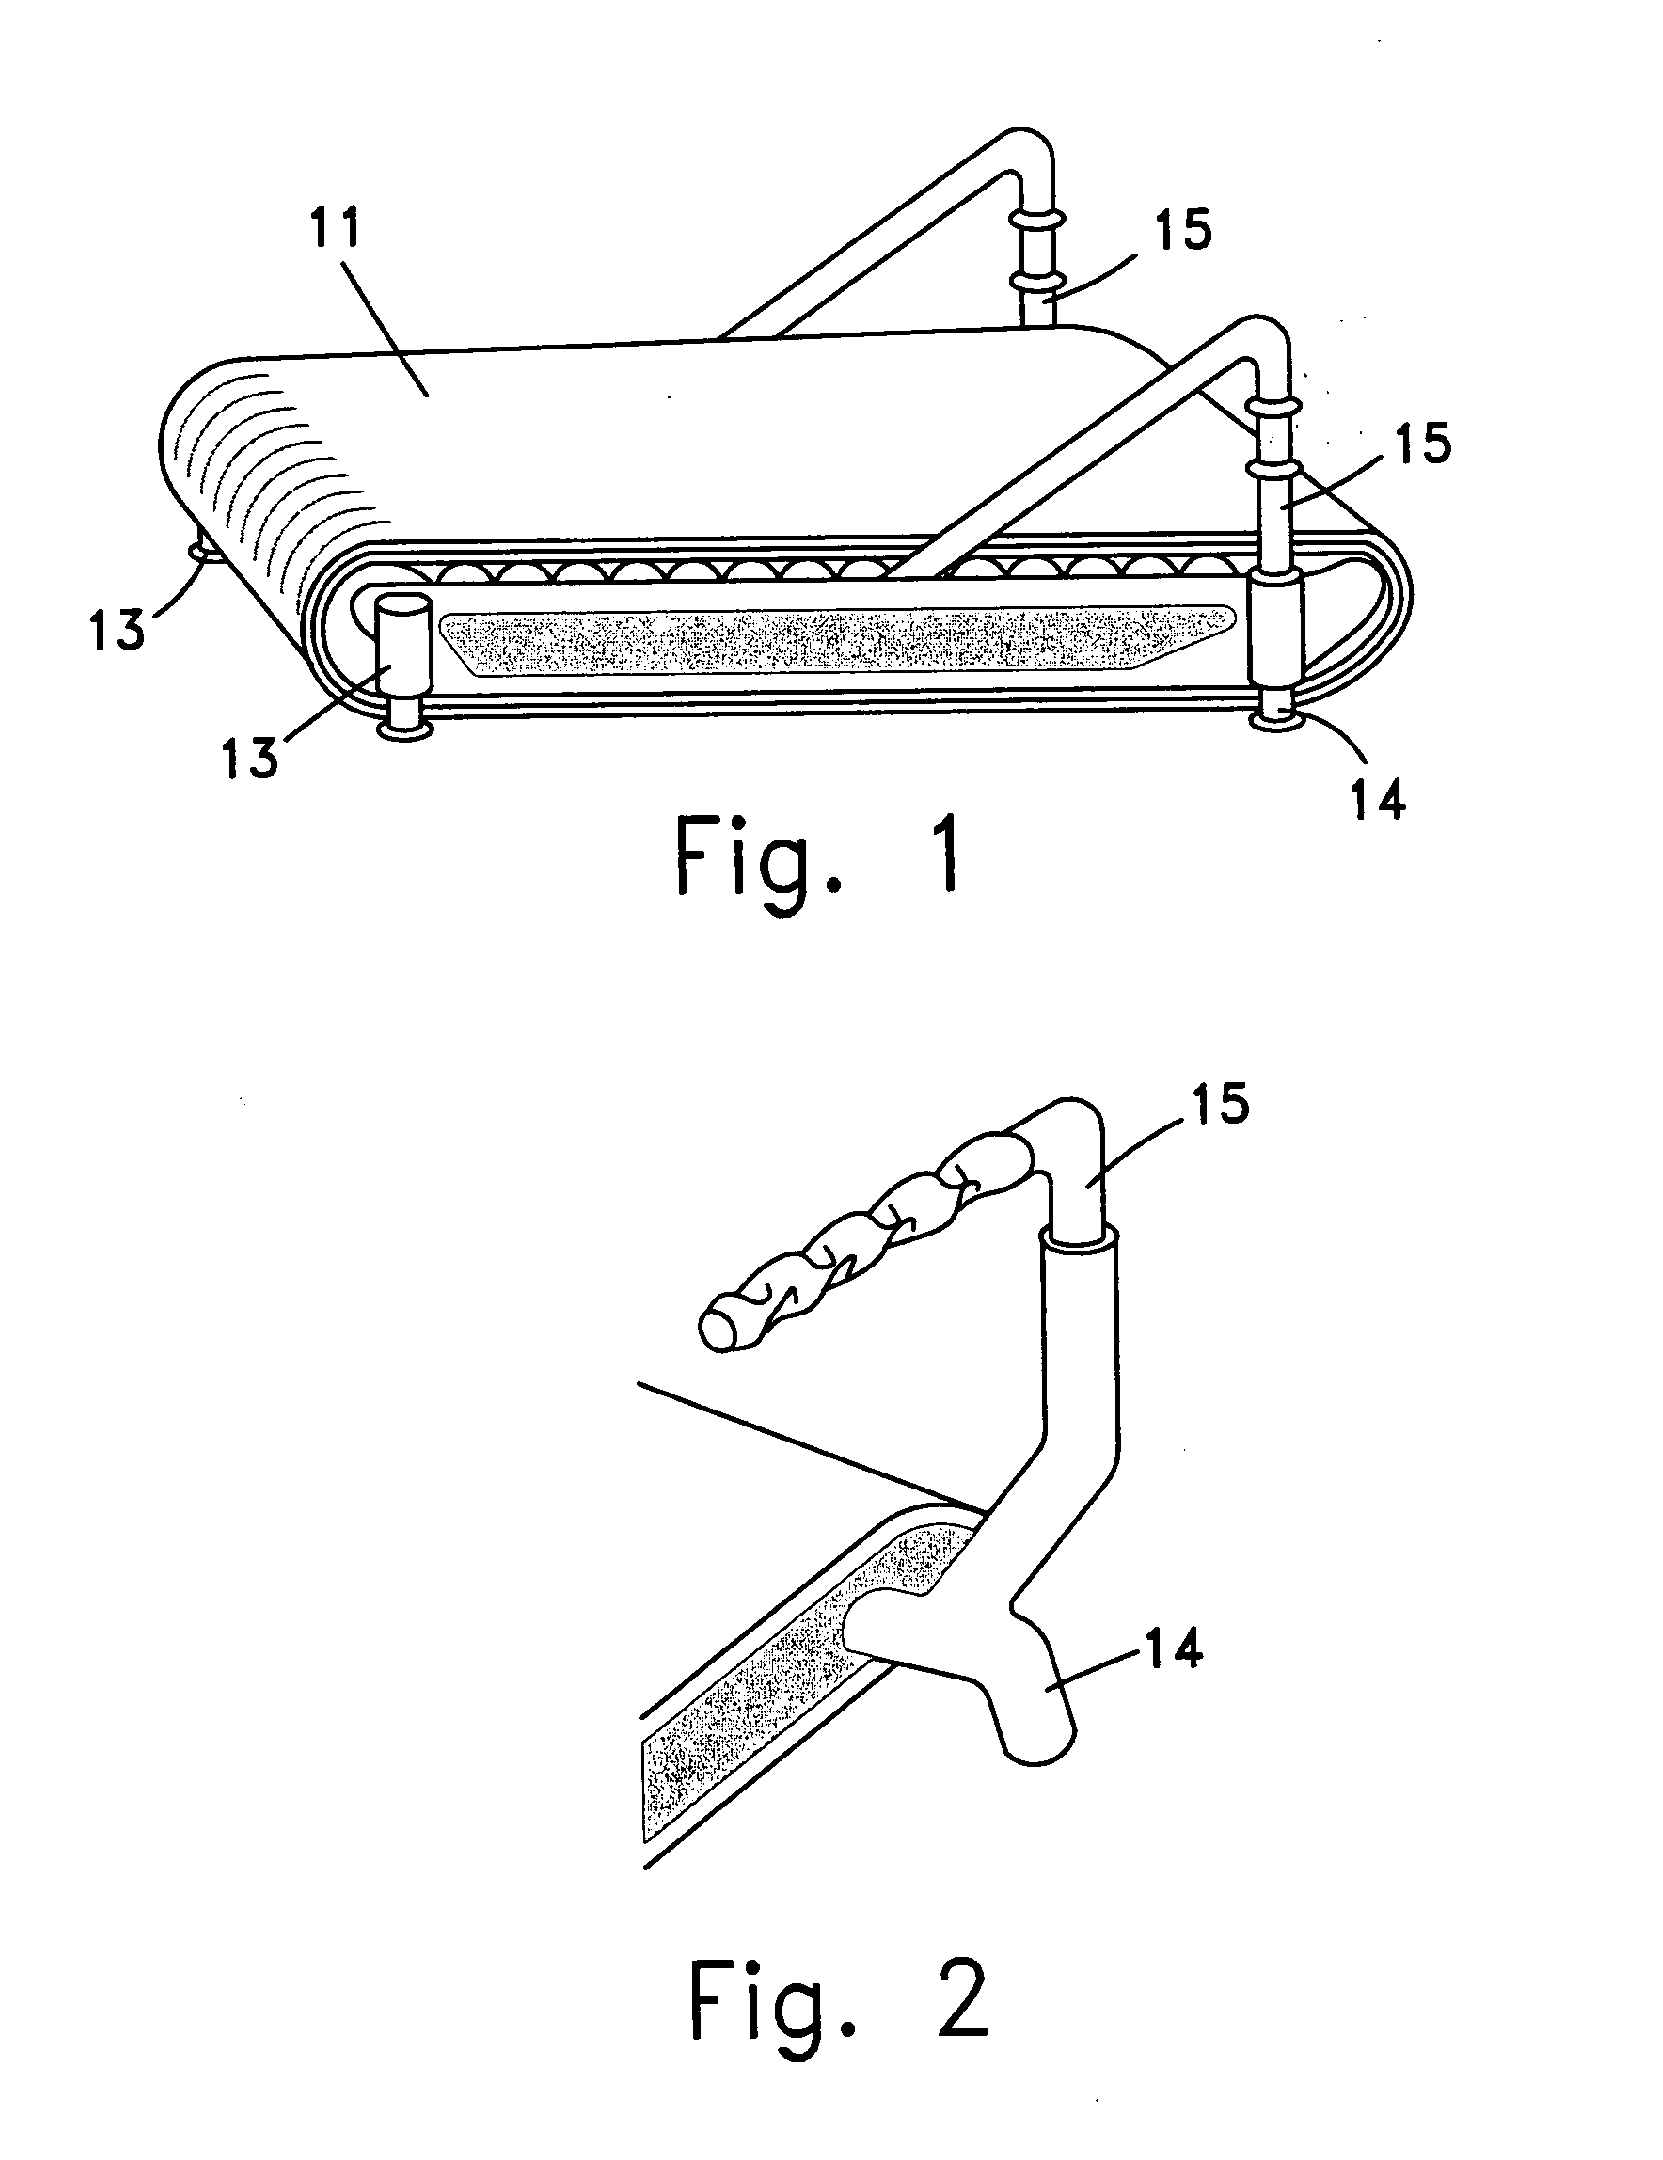 Exercise apparatus for mobility recovery and slimming